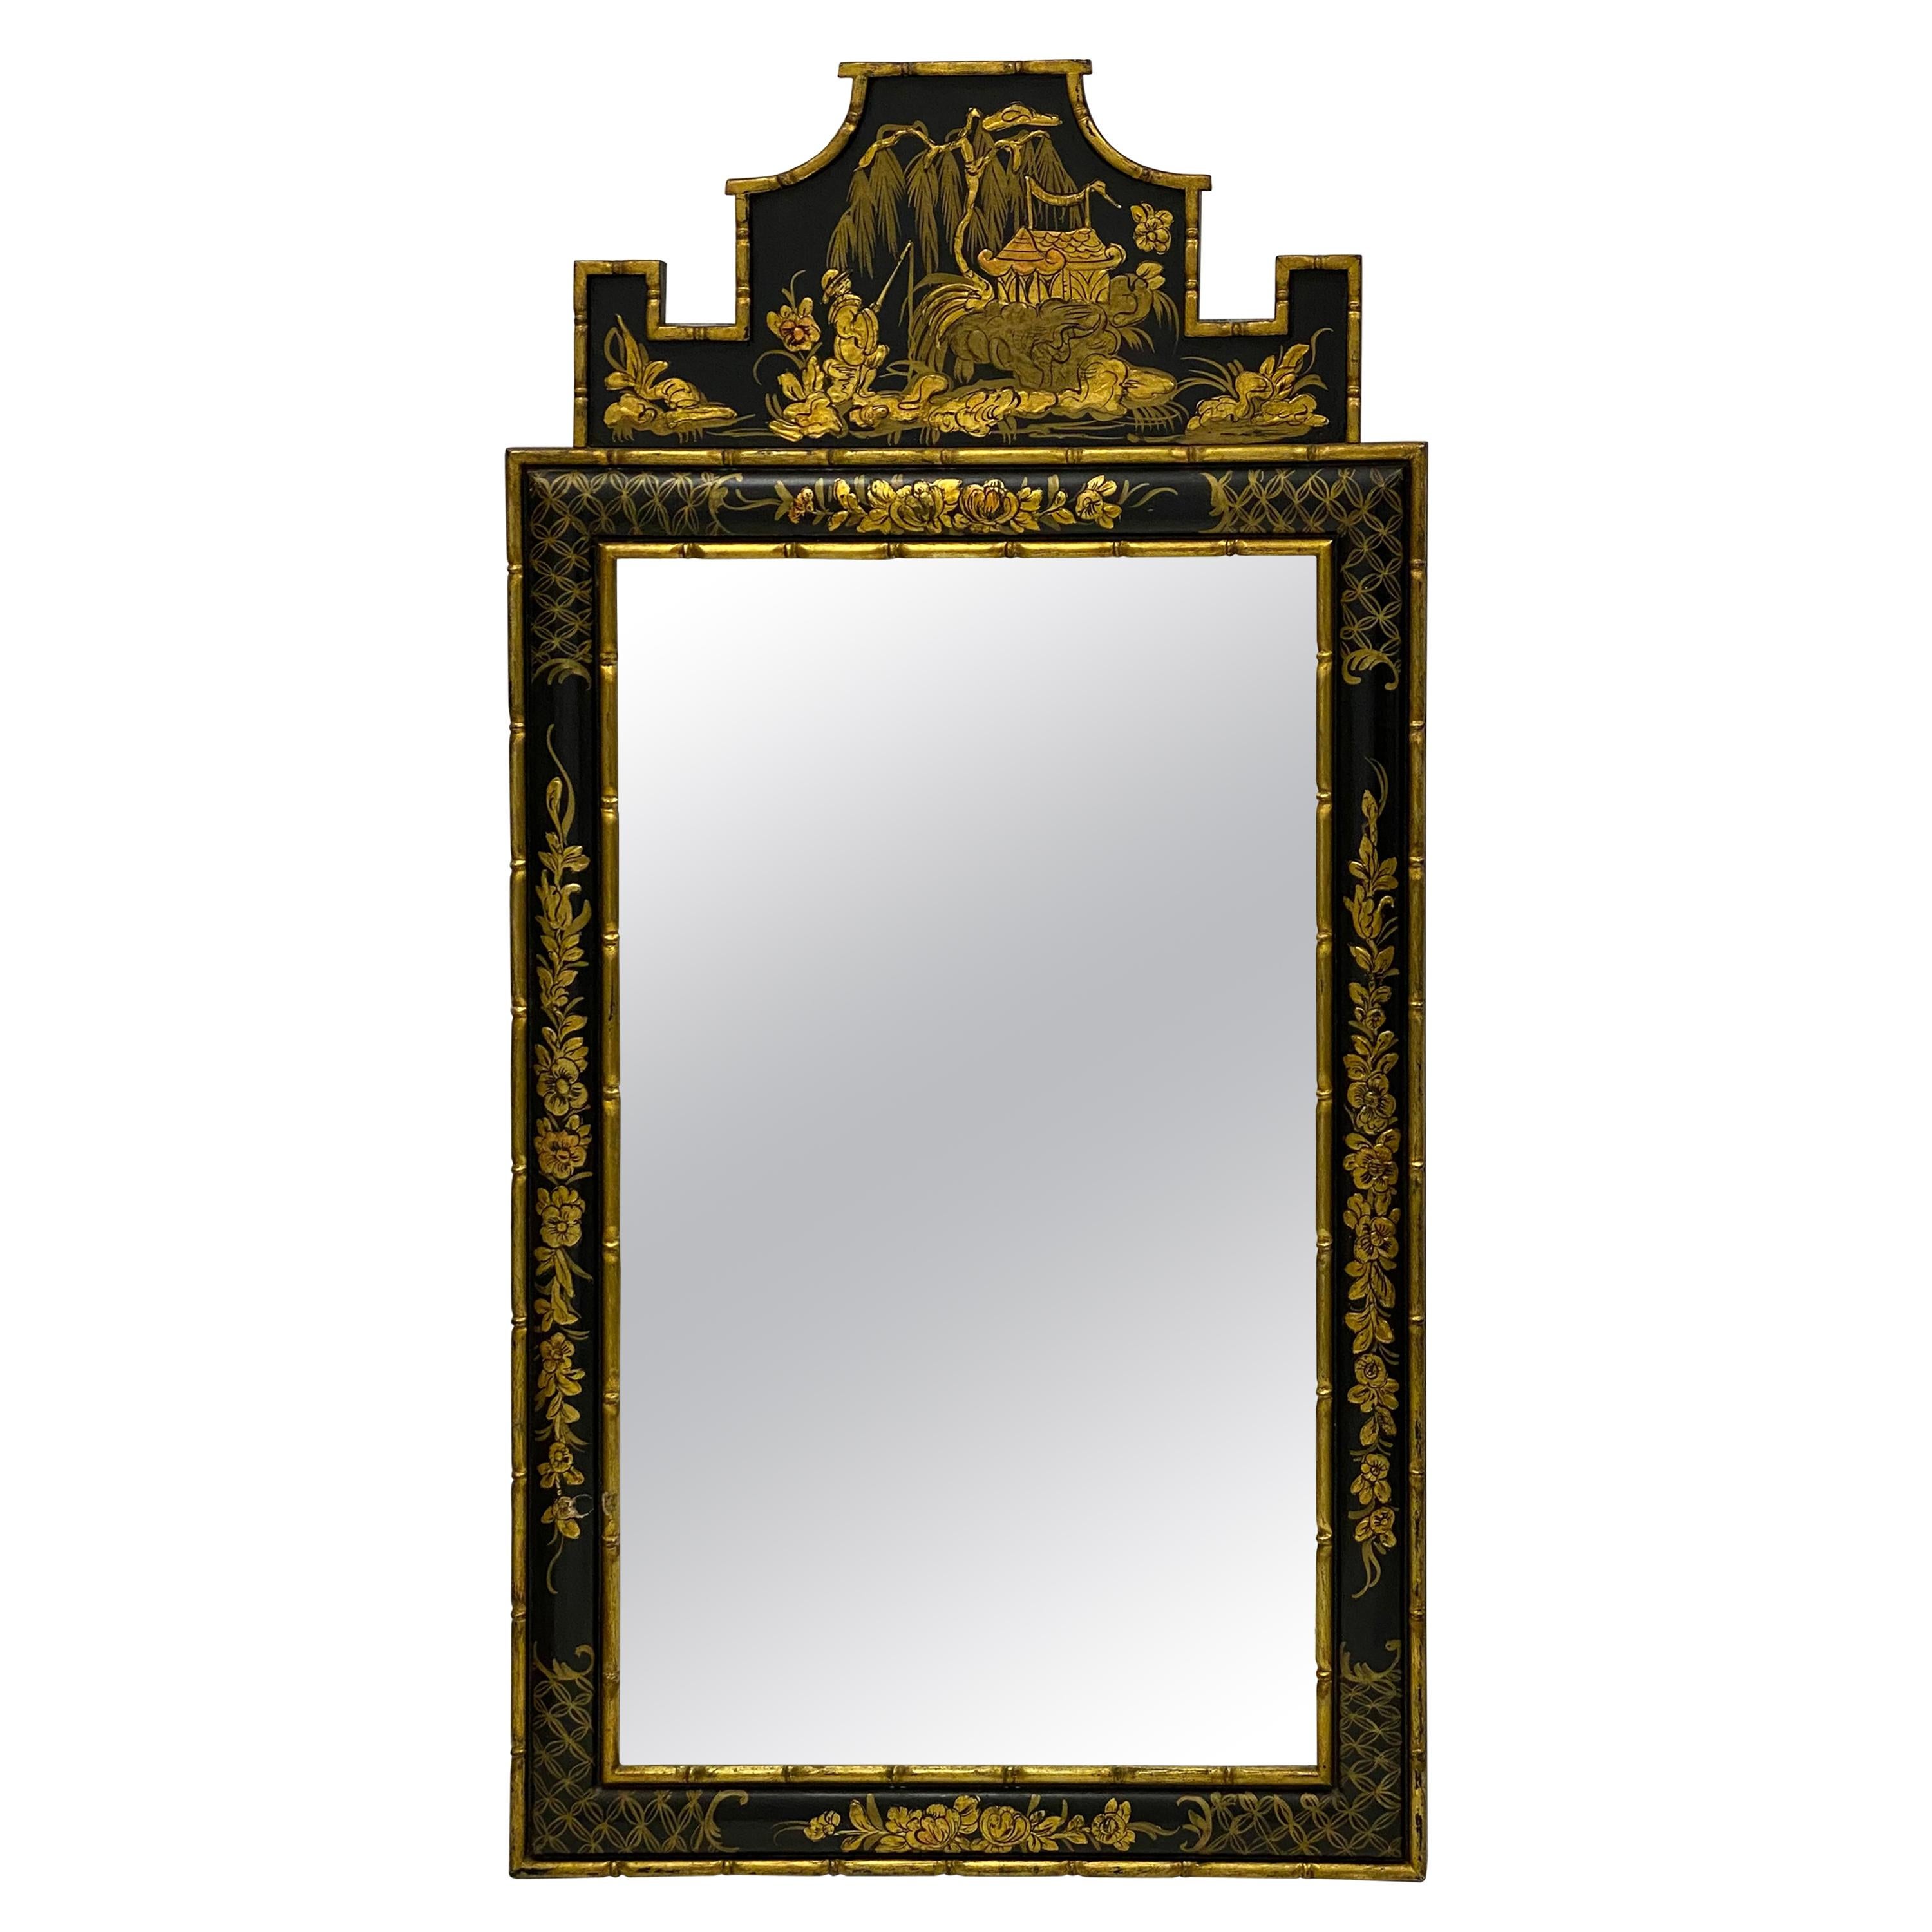 1970s Italian Giltwood Chinoiserie Mirror Attributed to Friedman Brothers